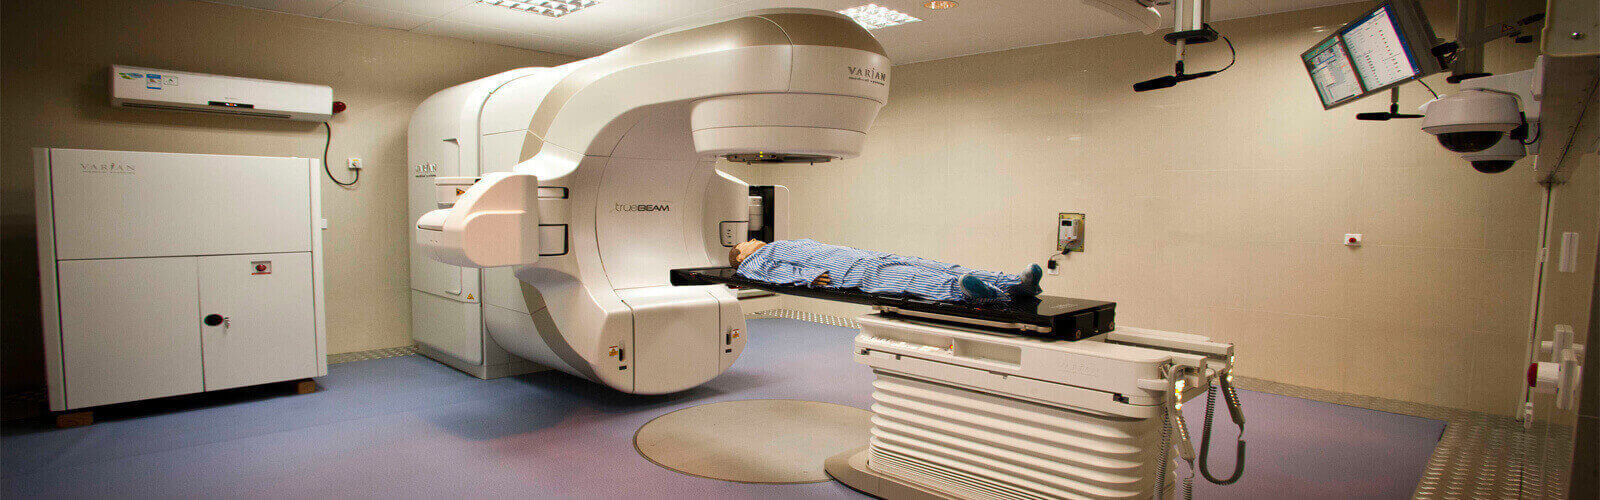 Radiotherapy in India